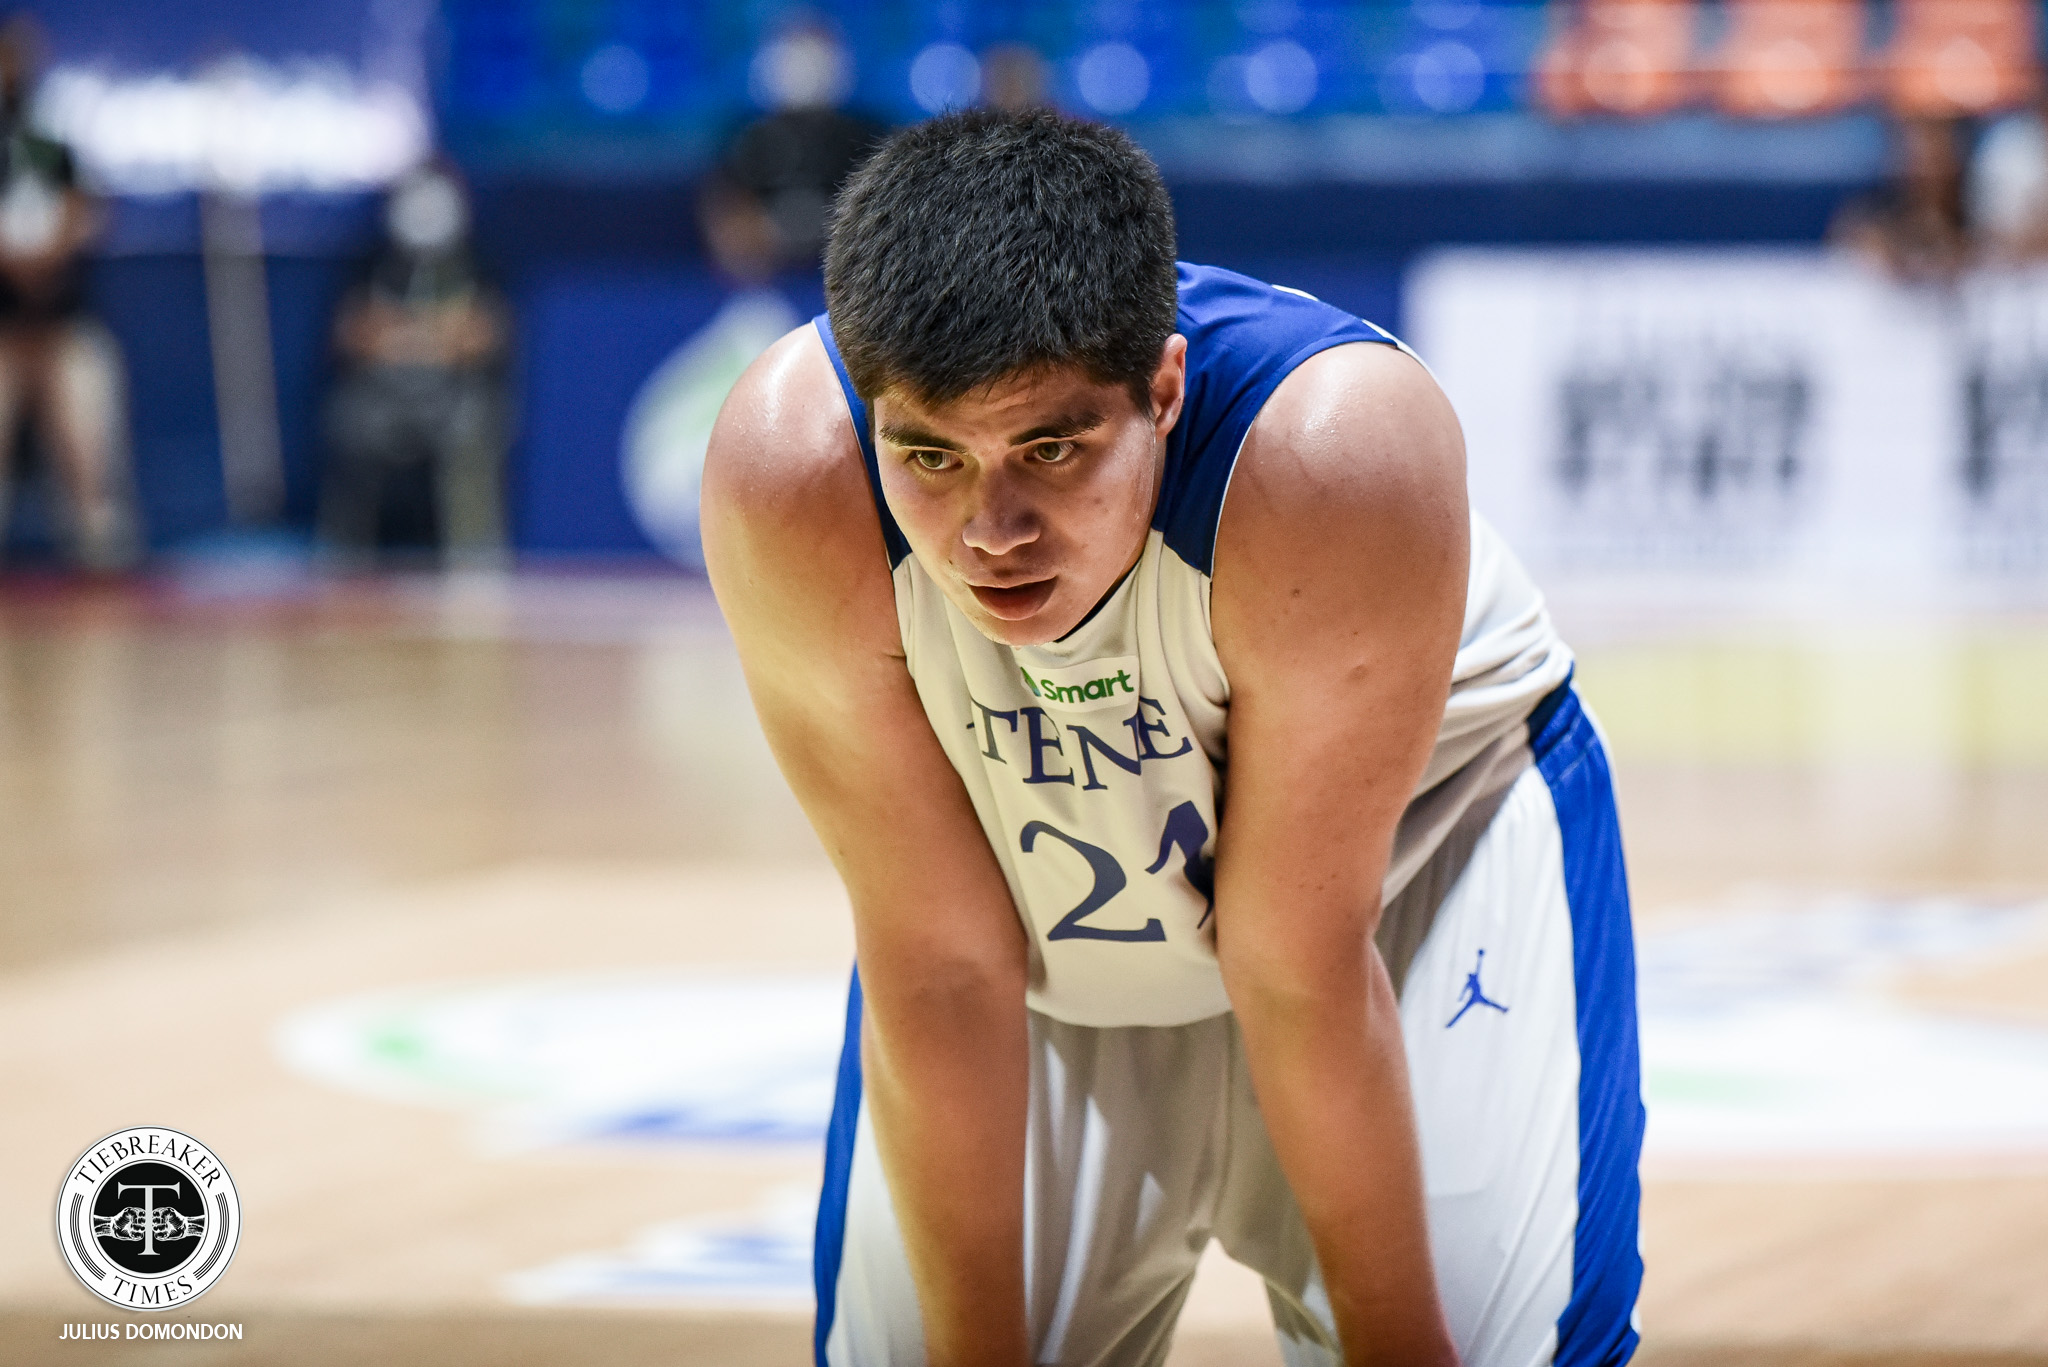 FFVC-MASON-AMOS-4118 Mason Amos can't wait to have more face-offs against good pal Francis Lopez ADMU Basketball News  - philippine sports news